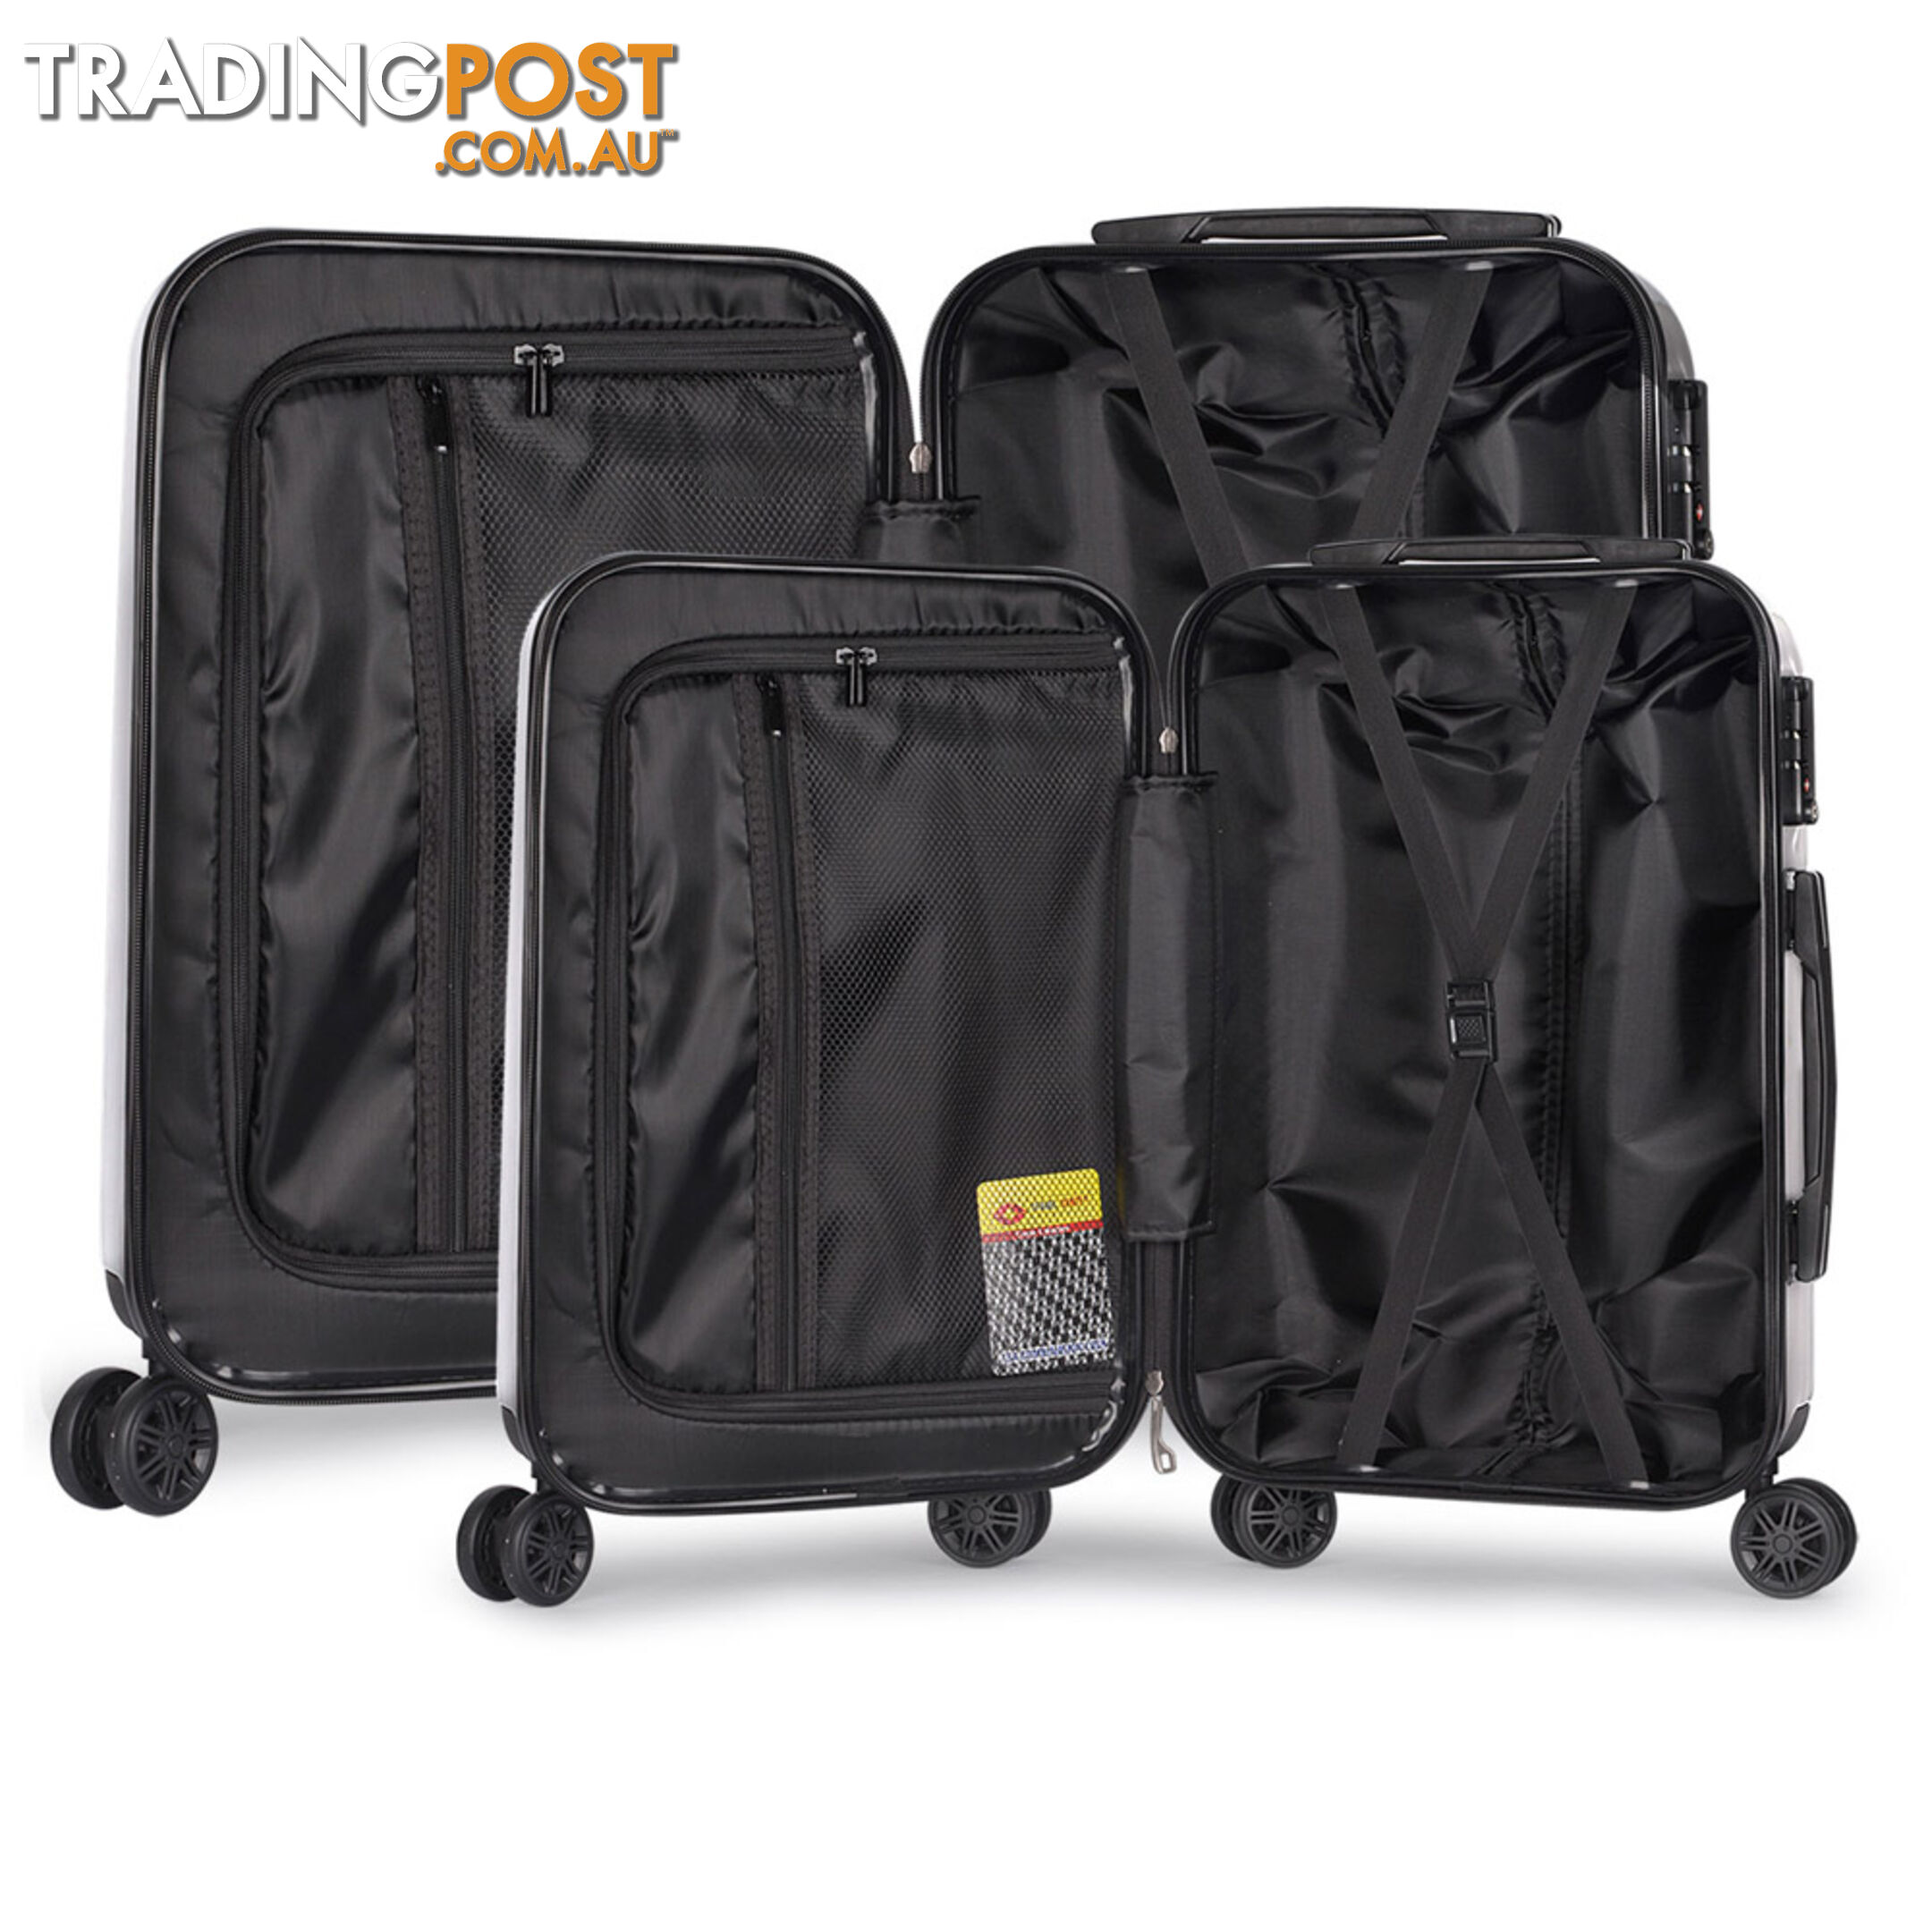 2PCS Travel Luggage Set Hard Shell Super Lightweight Suitcase Carry On Silver